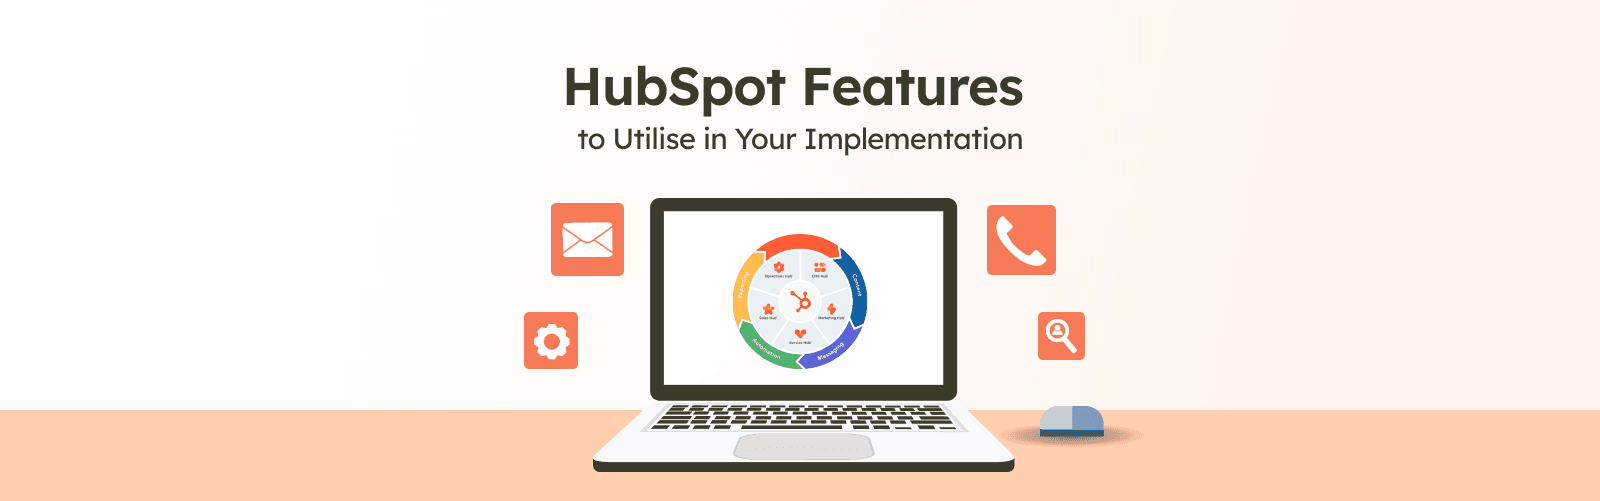 HubSpot Features to Utilise in Your Implementation